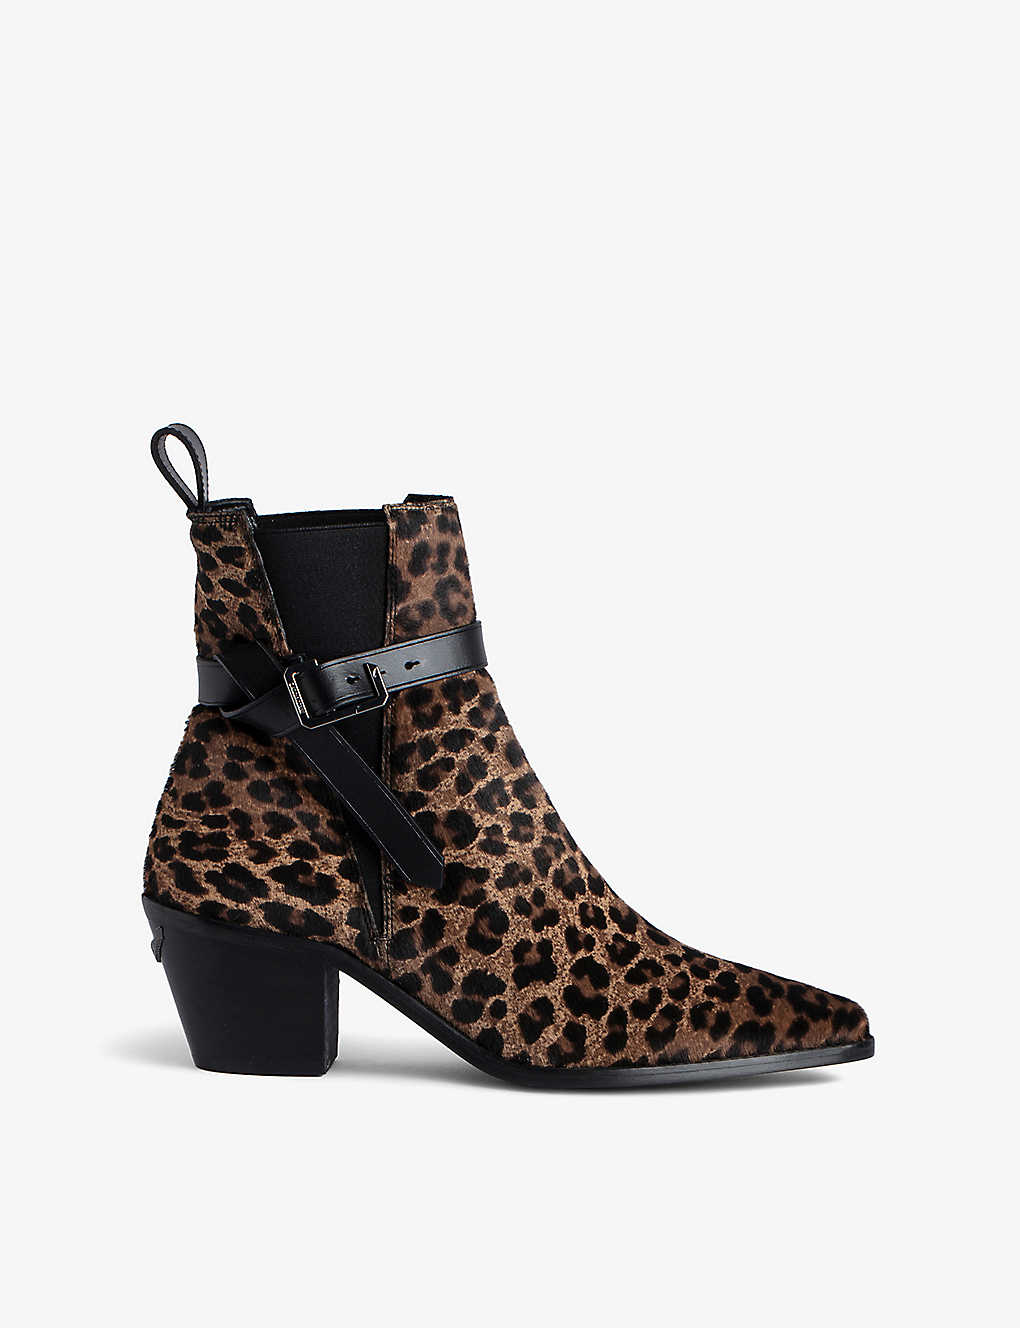 ZADIG & VOLTAIRE ZADIG&VOLTAIRE WOMENS HERITAGE TYLER CECILIA ANIMAL-PRINT SUEDE ANKLE BOOTS